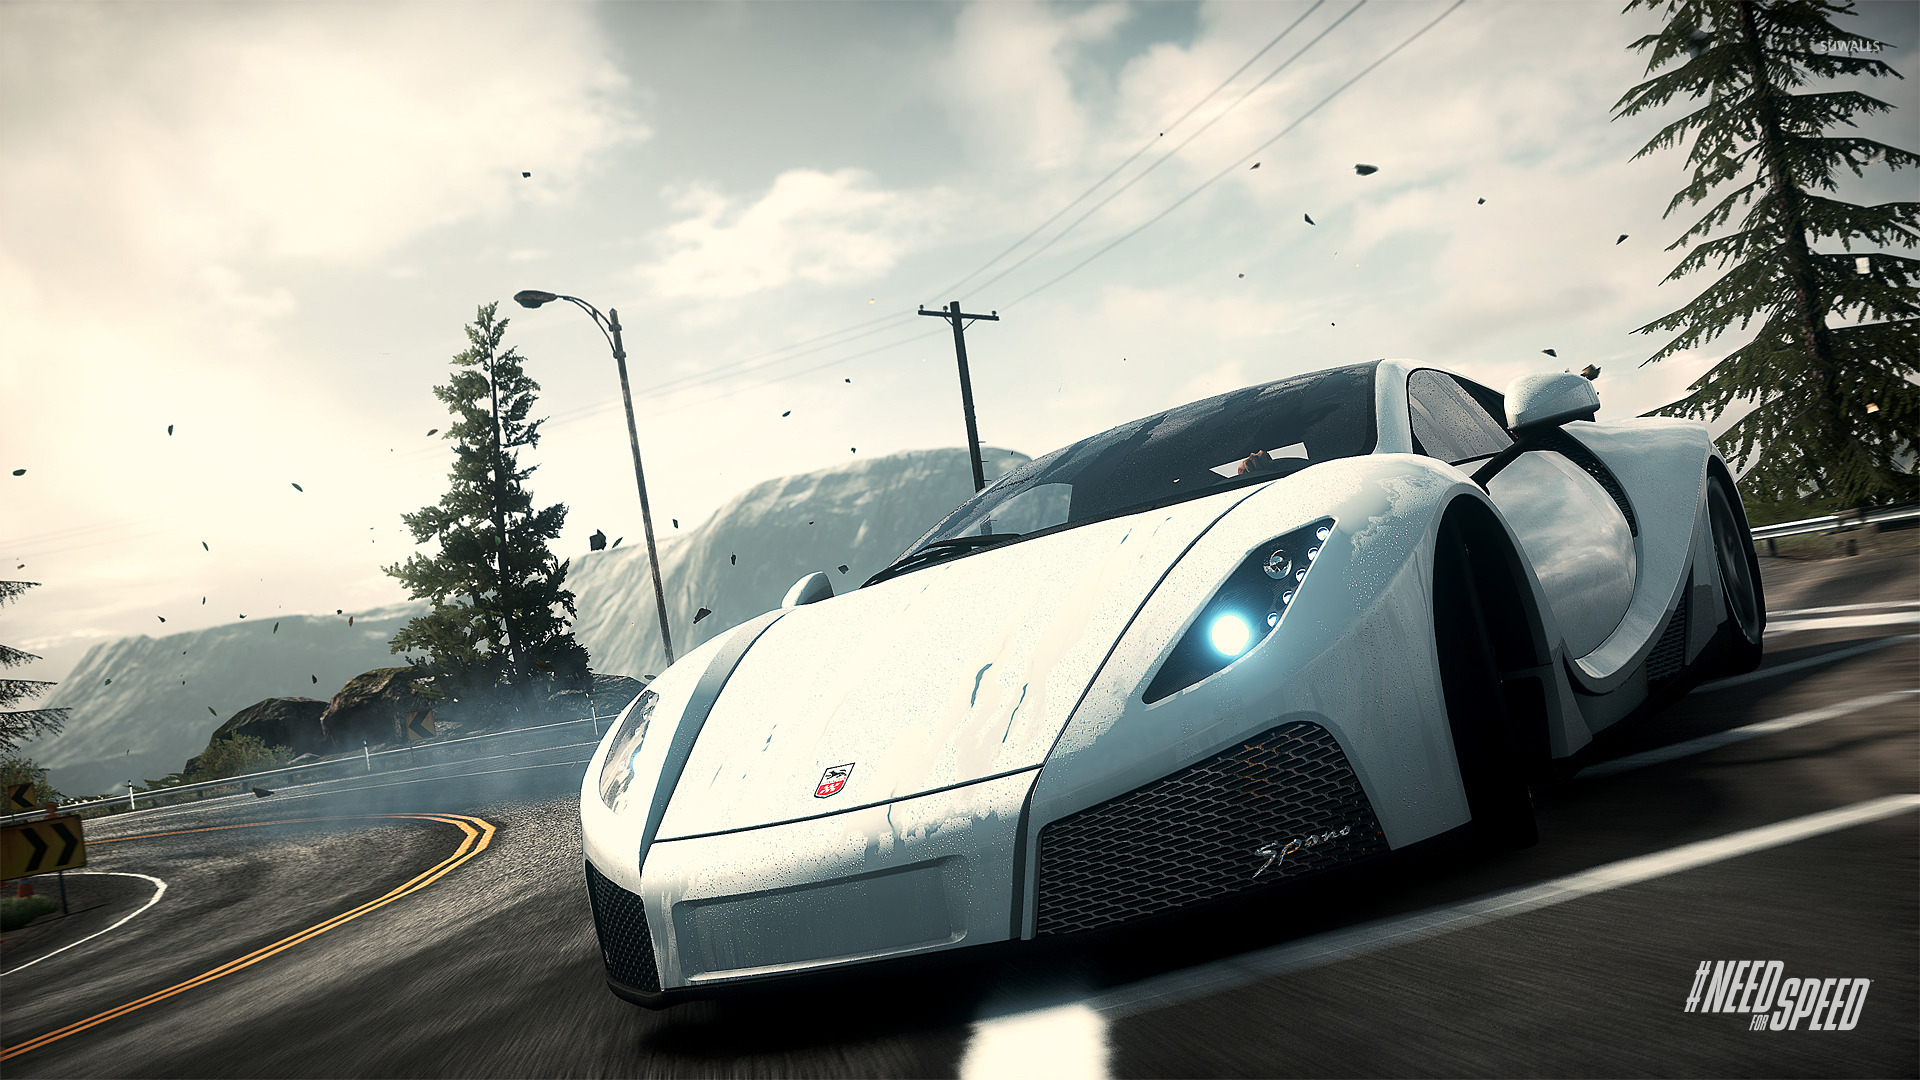 GTA Spano - Need for Speed: Rivals wallpaper - Game wallpapers - #28940